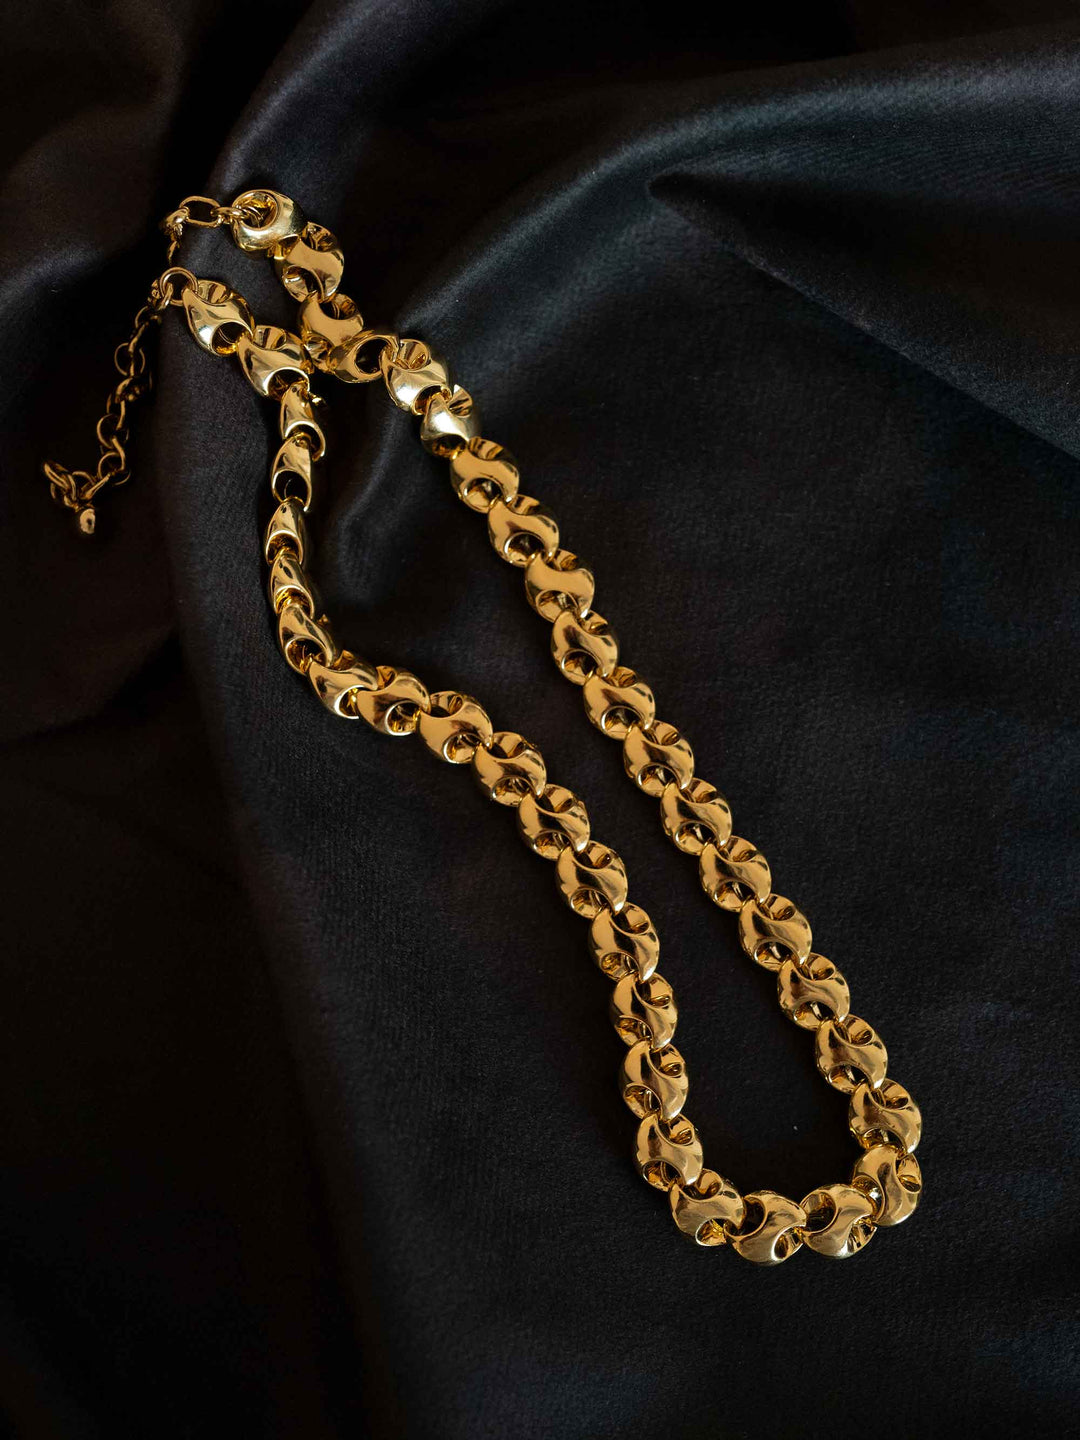 A gold necklace with interlocking rings